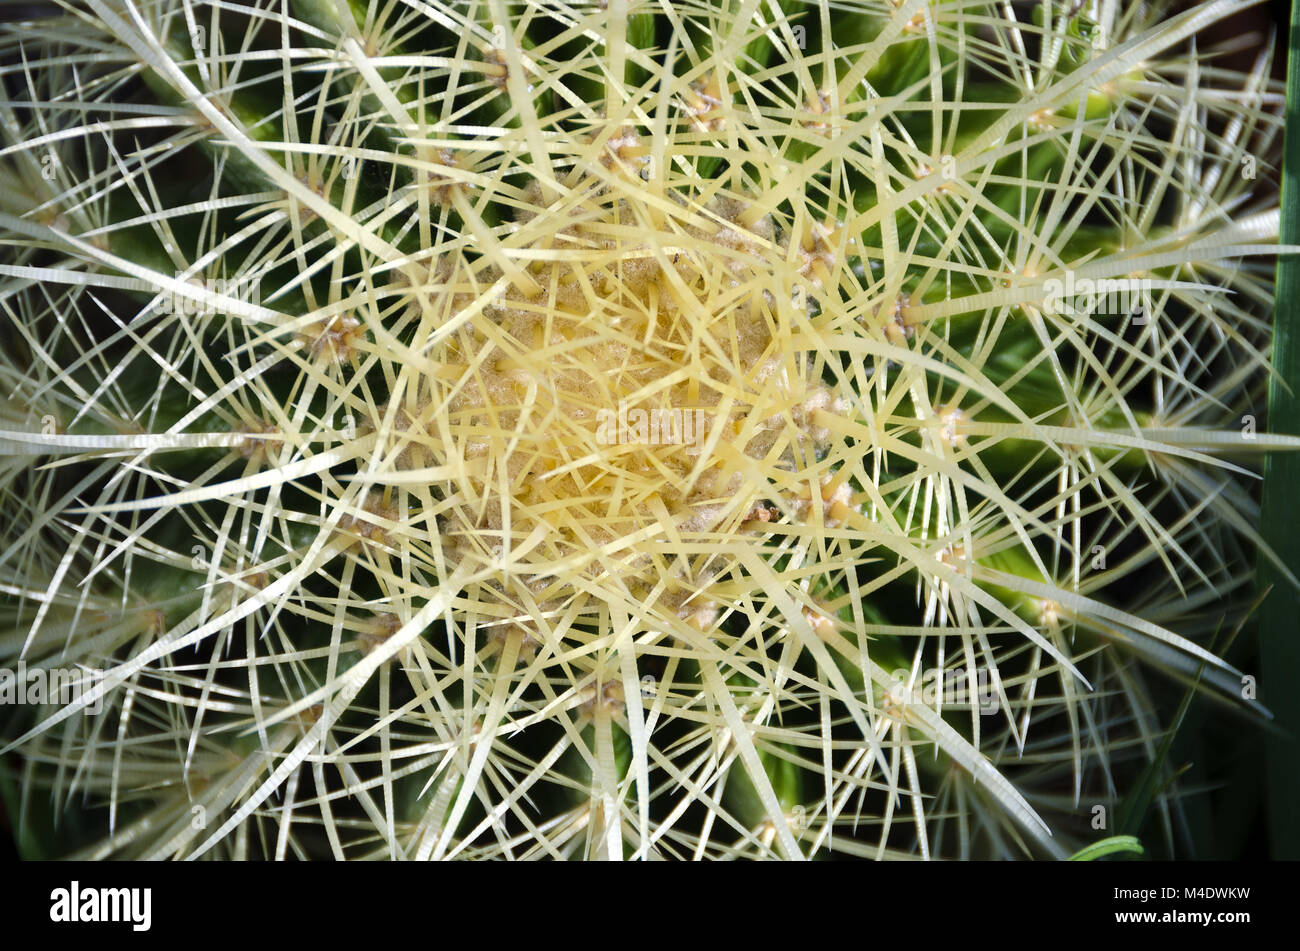 hairy areole of a cactus Stock Photo